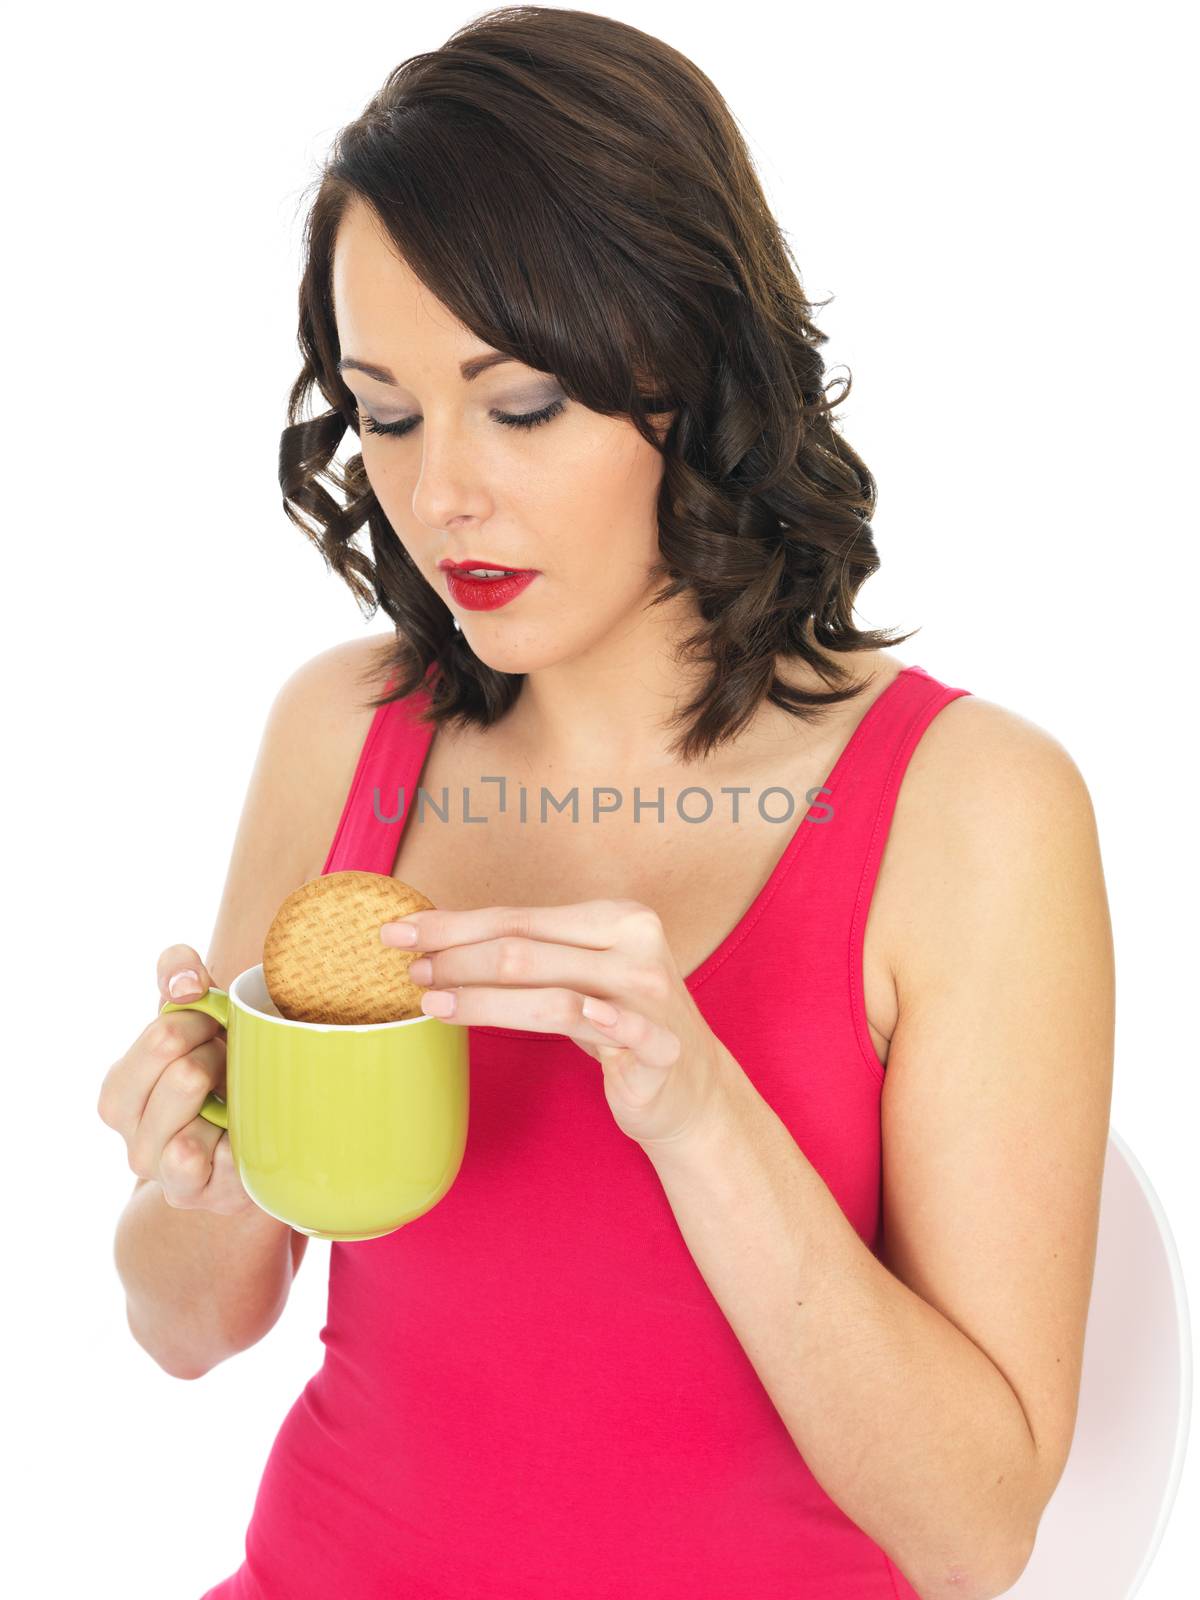 Young Woman with a Mug of Tea and Biscuit by Whiteboxmedia